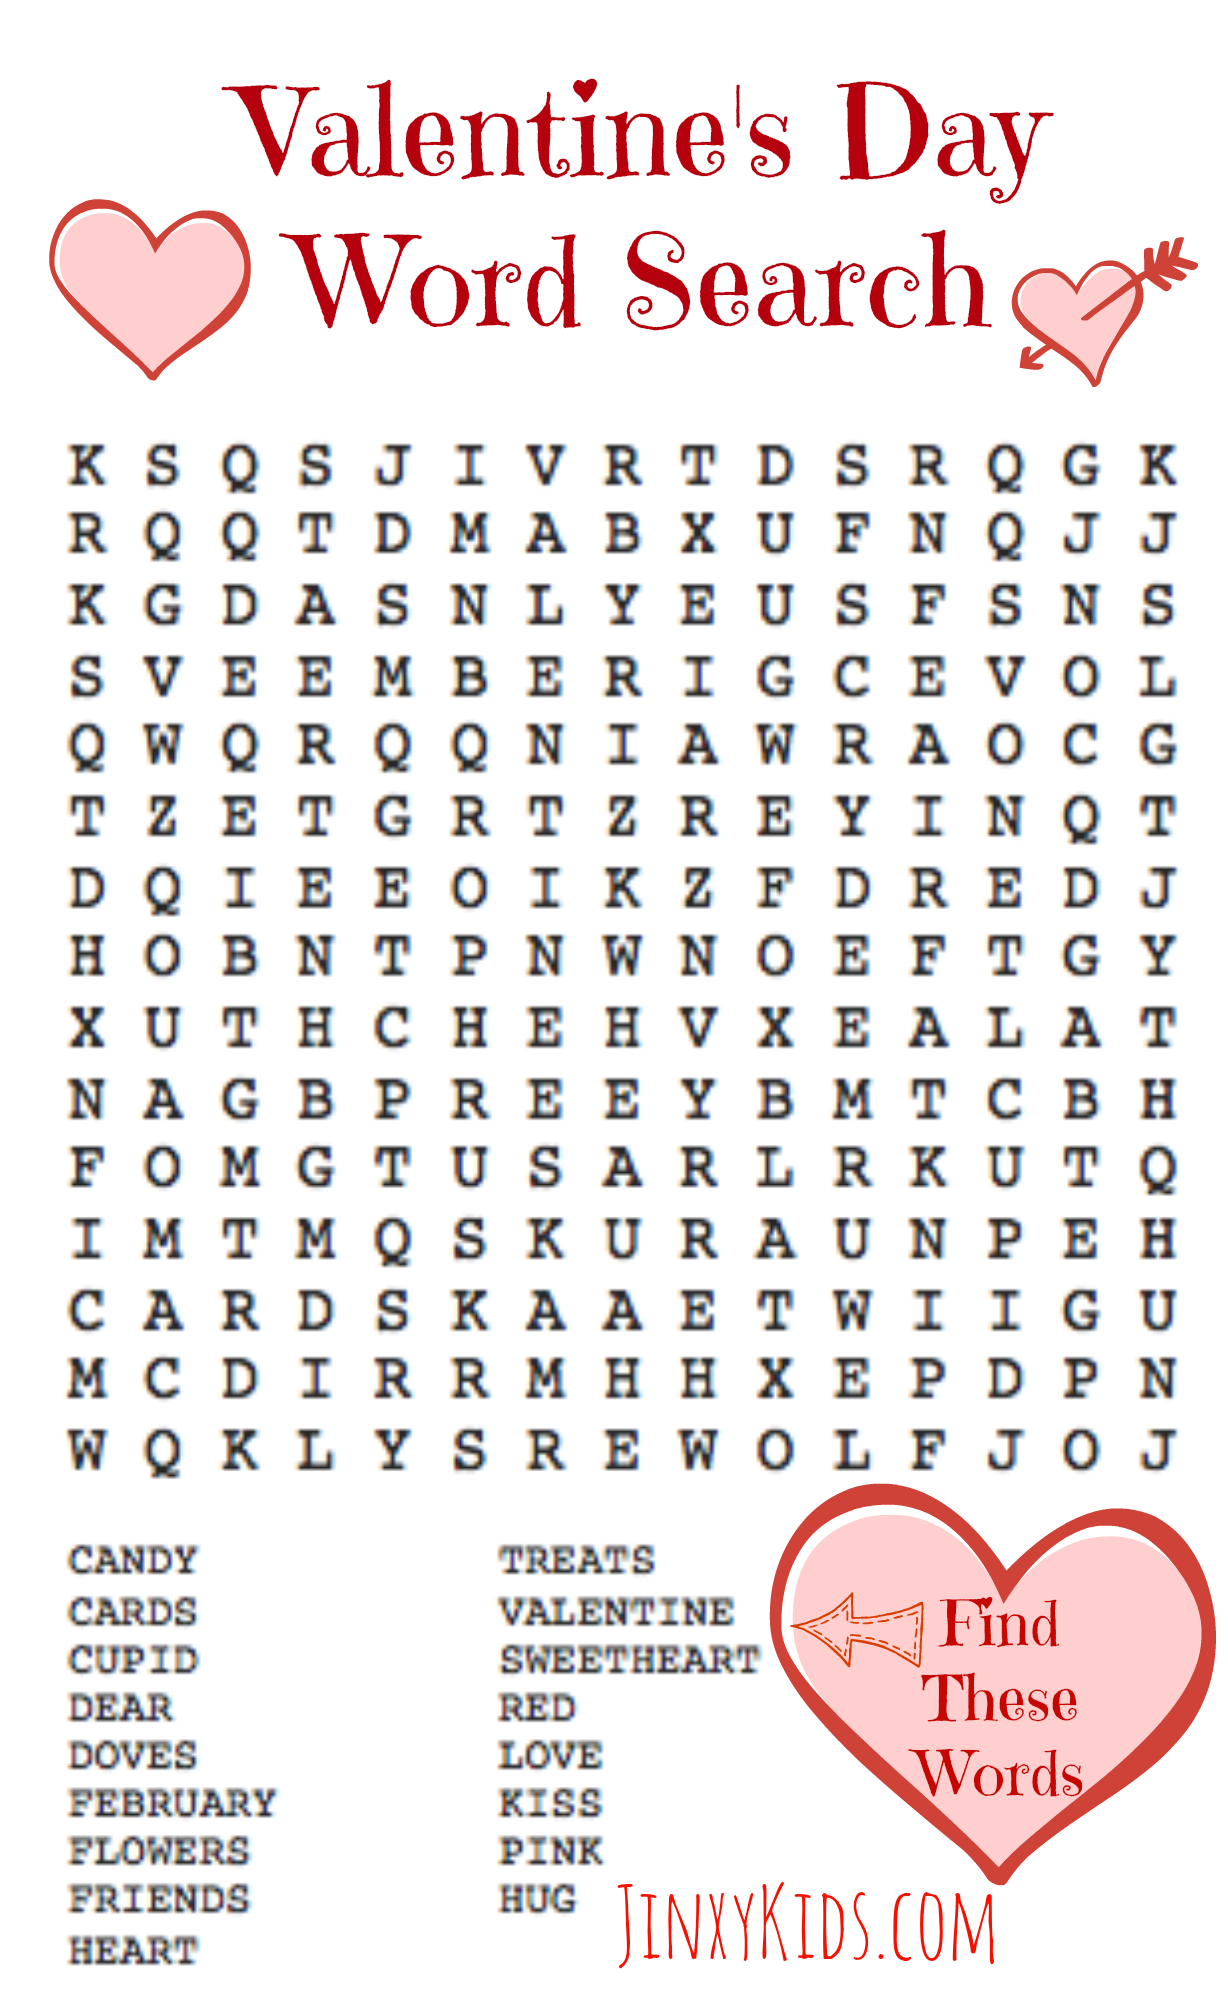 VALENTINES DAY WORD SEARCH